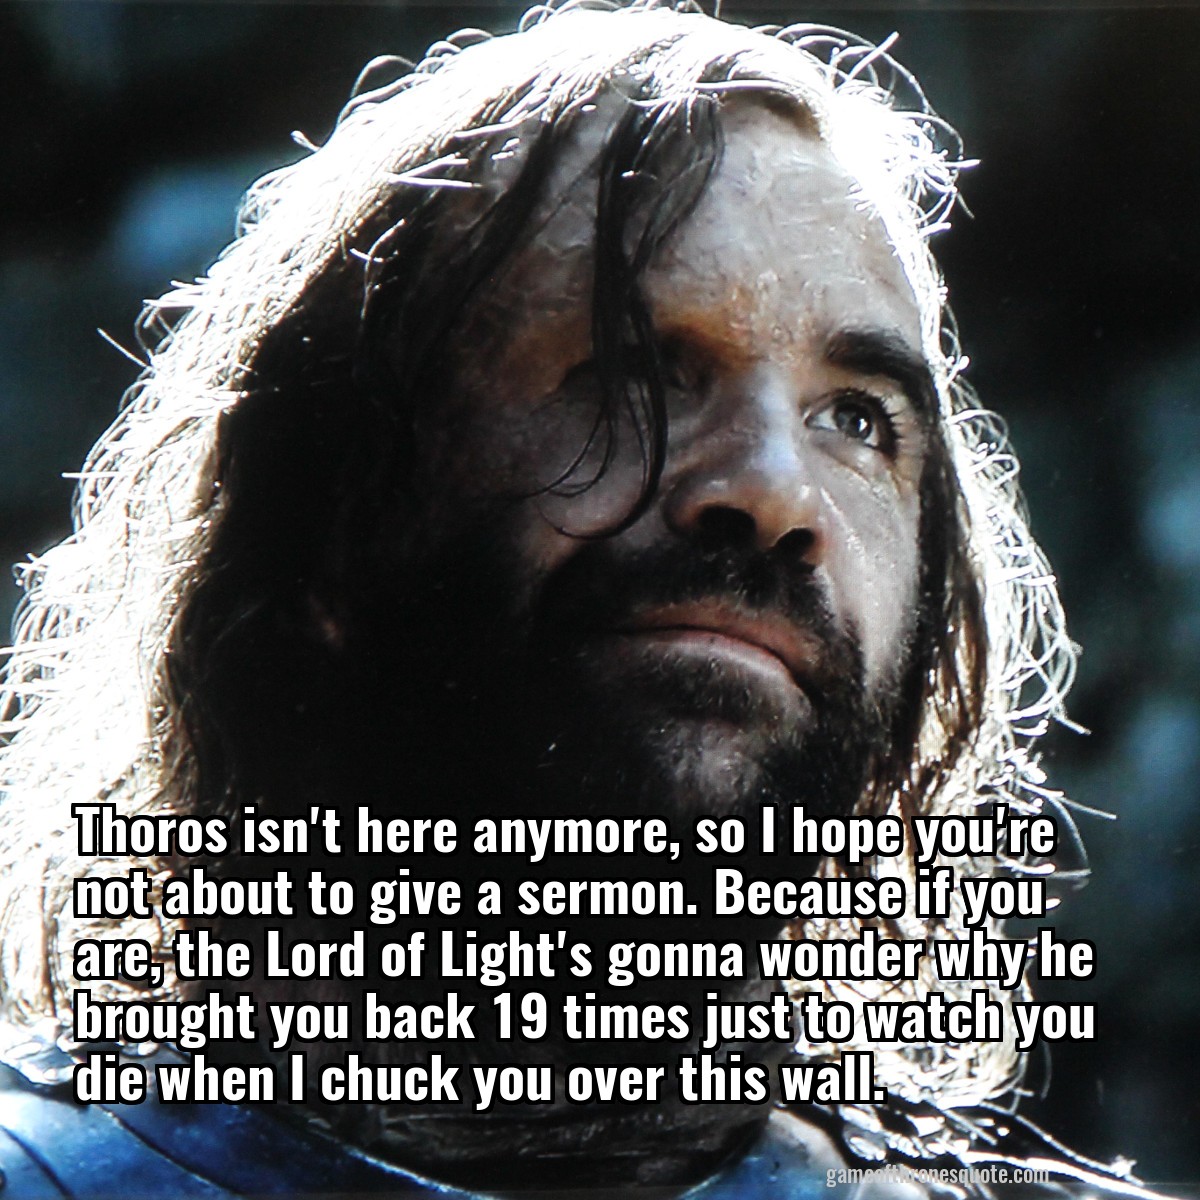 Thoros isn't here anymore, so I hope you're not about to give a sermon. Because if you are, the Lord of Light's gonna wonder why he brought you back 19 times just to watch you die when I chuck you over this wall.